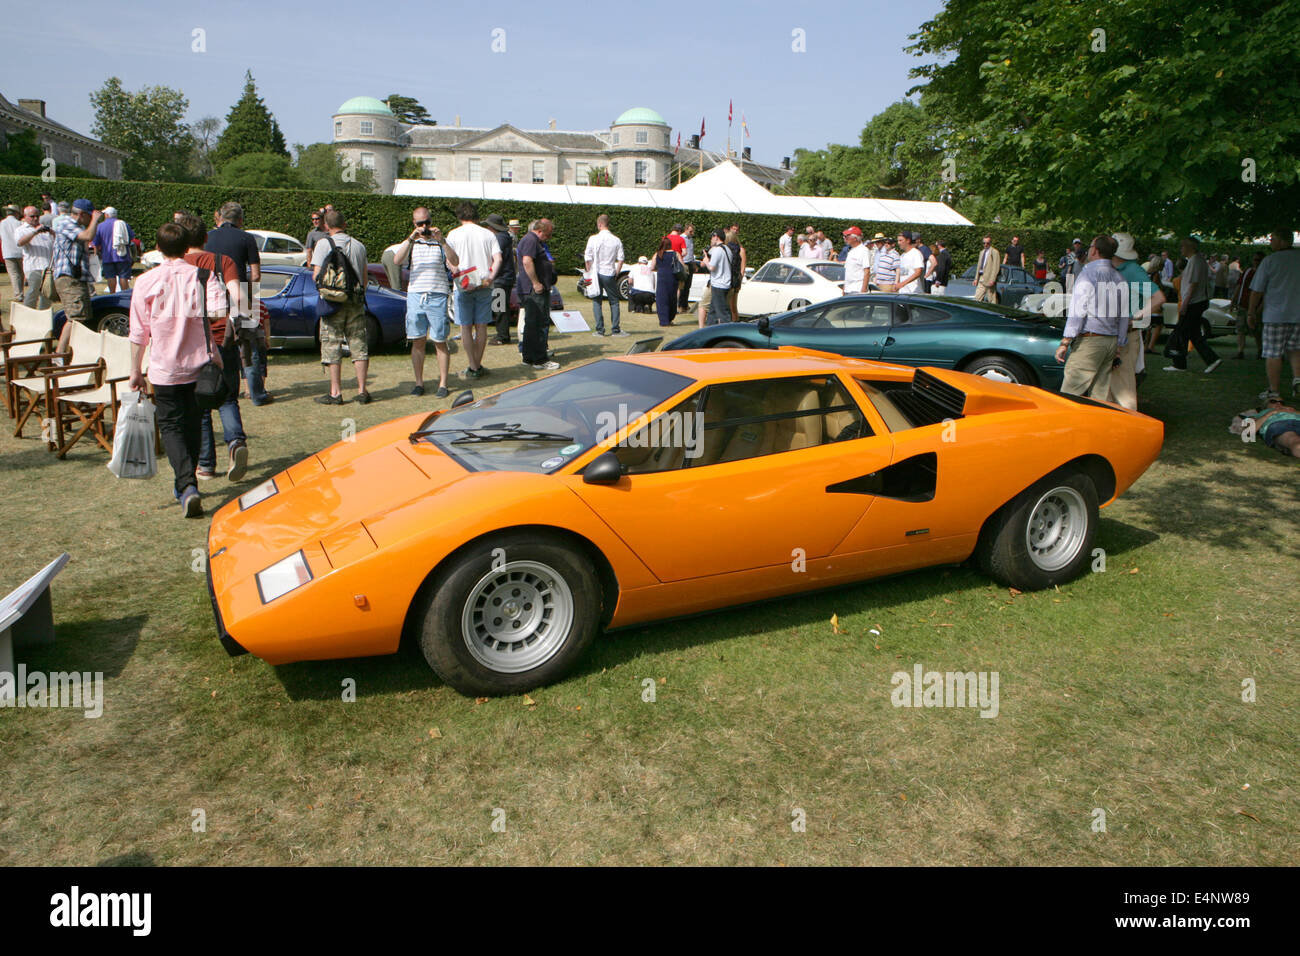 An mid 1970s Lamborghini Countach on show at Goodwood Festival of Speed near Chichester in 2013. Stock Photo